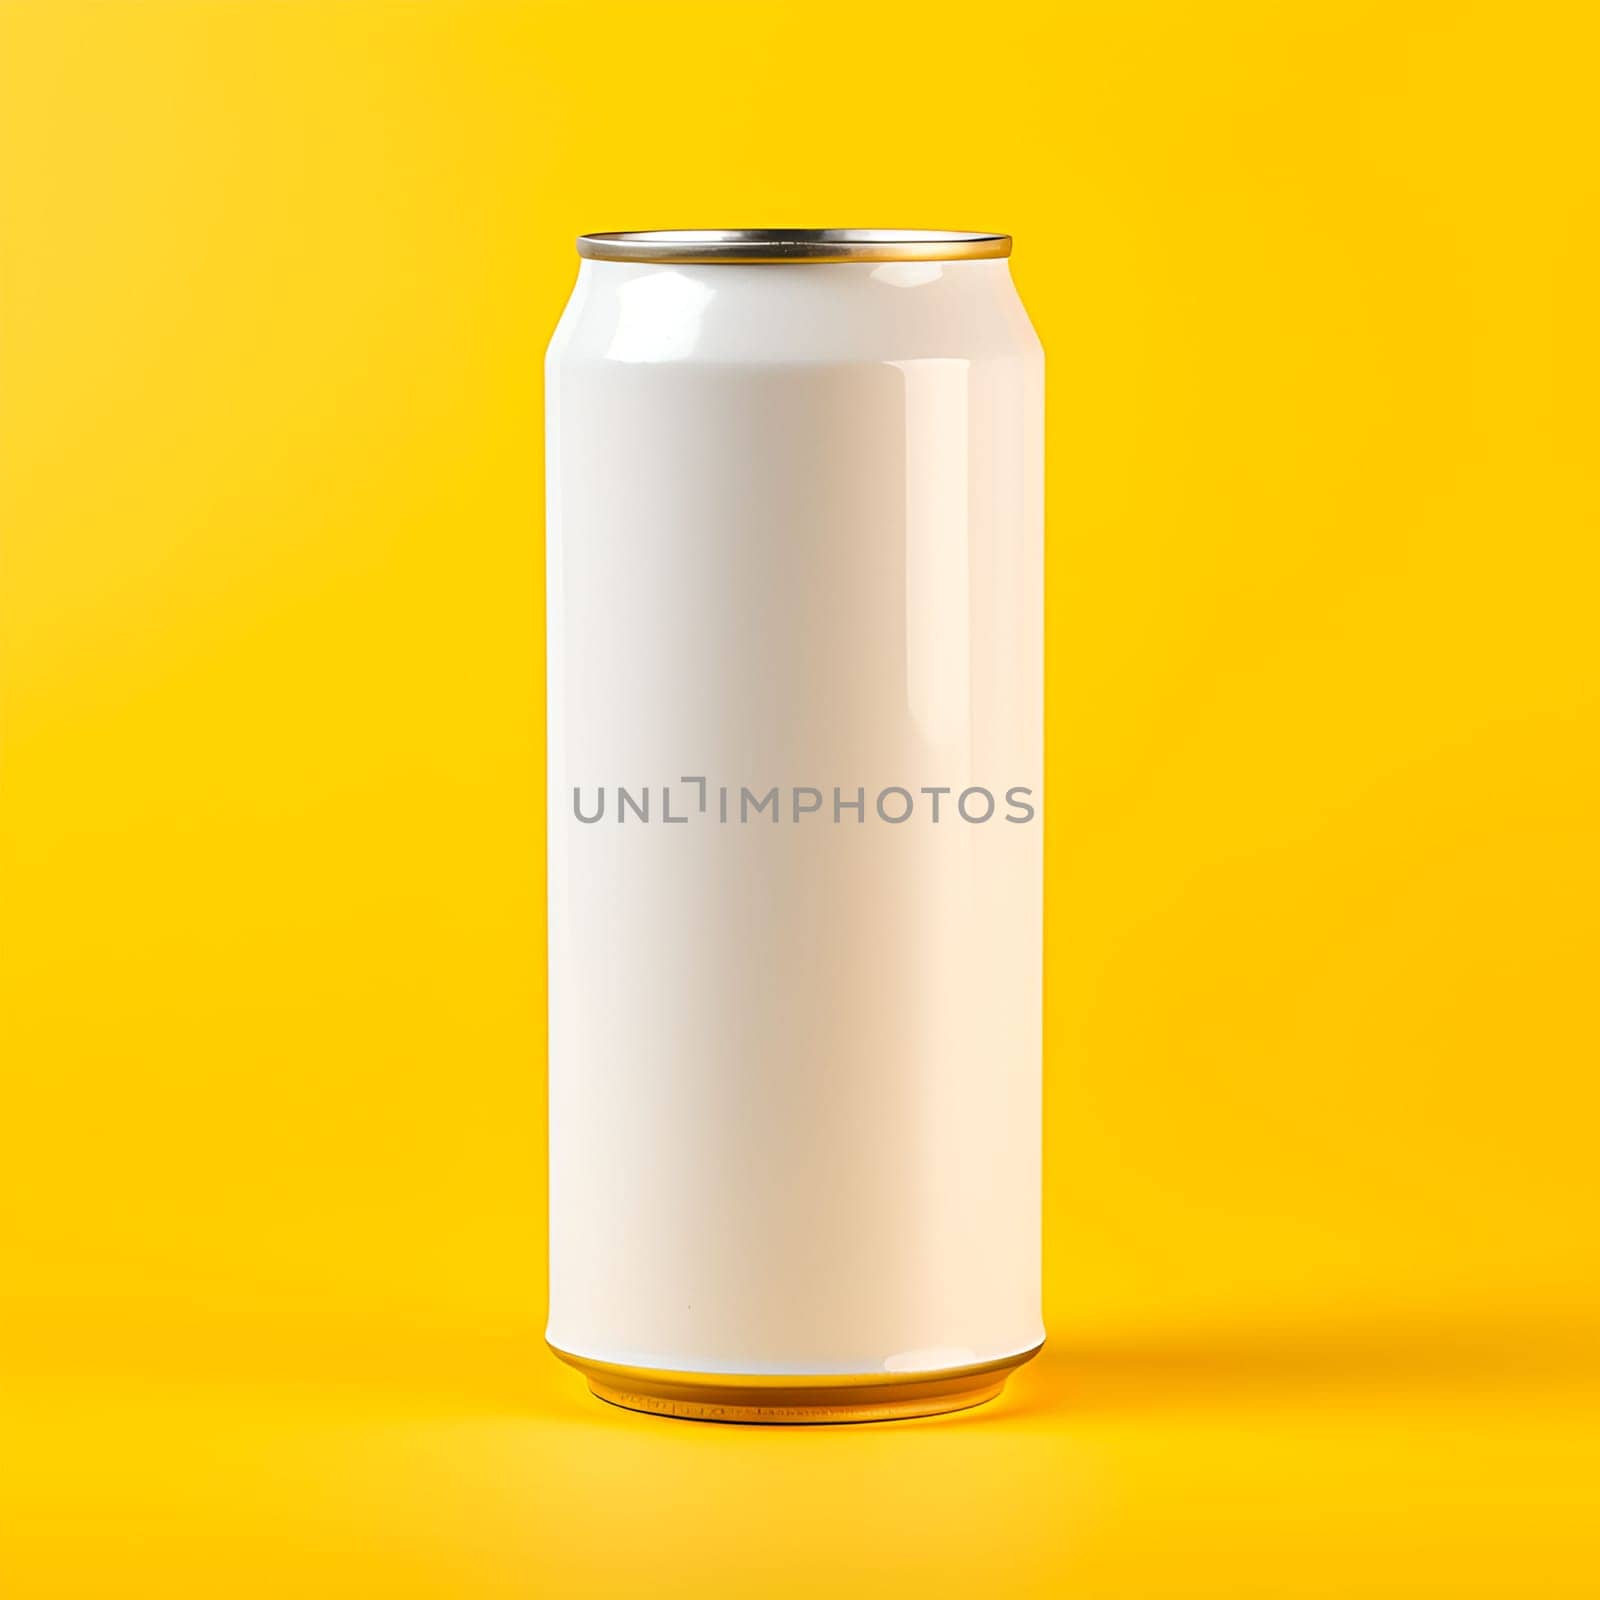 white aluminum cans isolated on yellow background. Mockup for soda water, soft drinks concept, beer